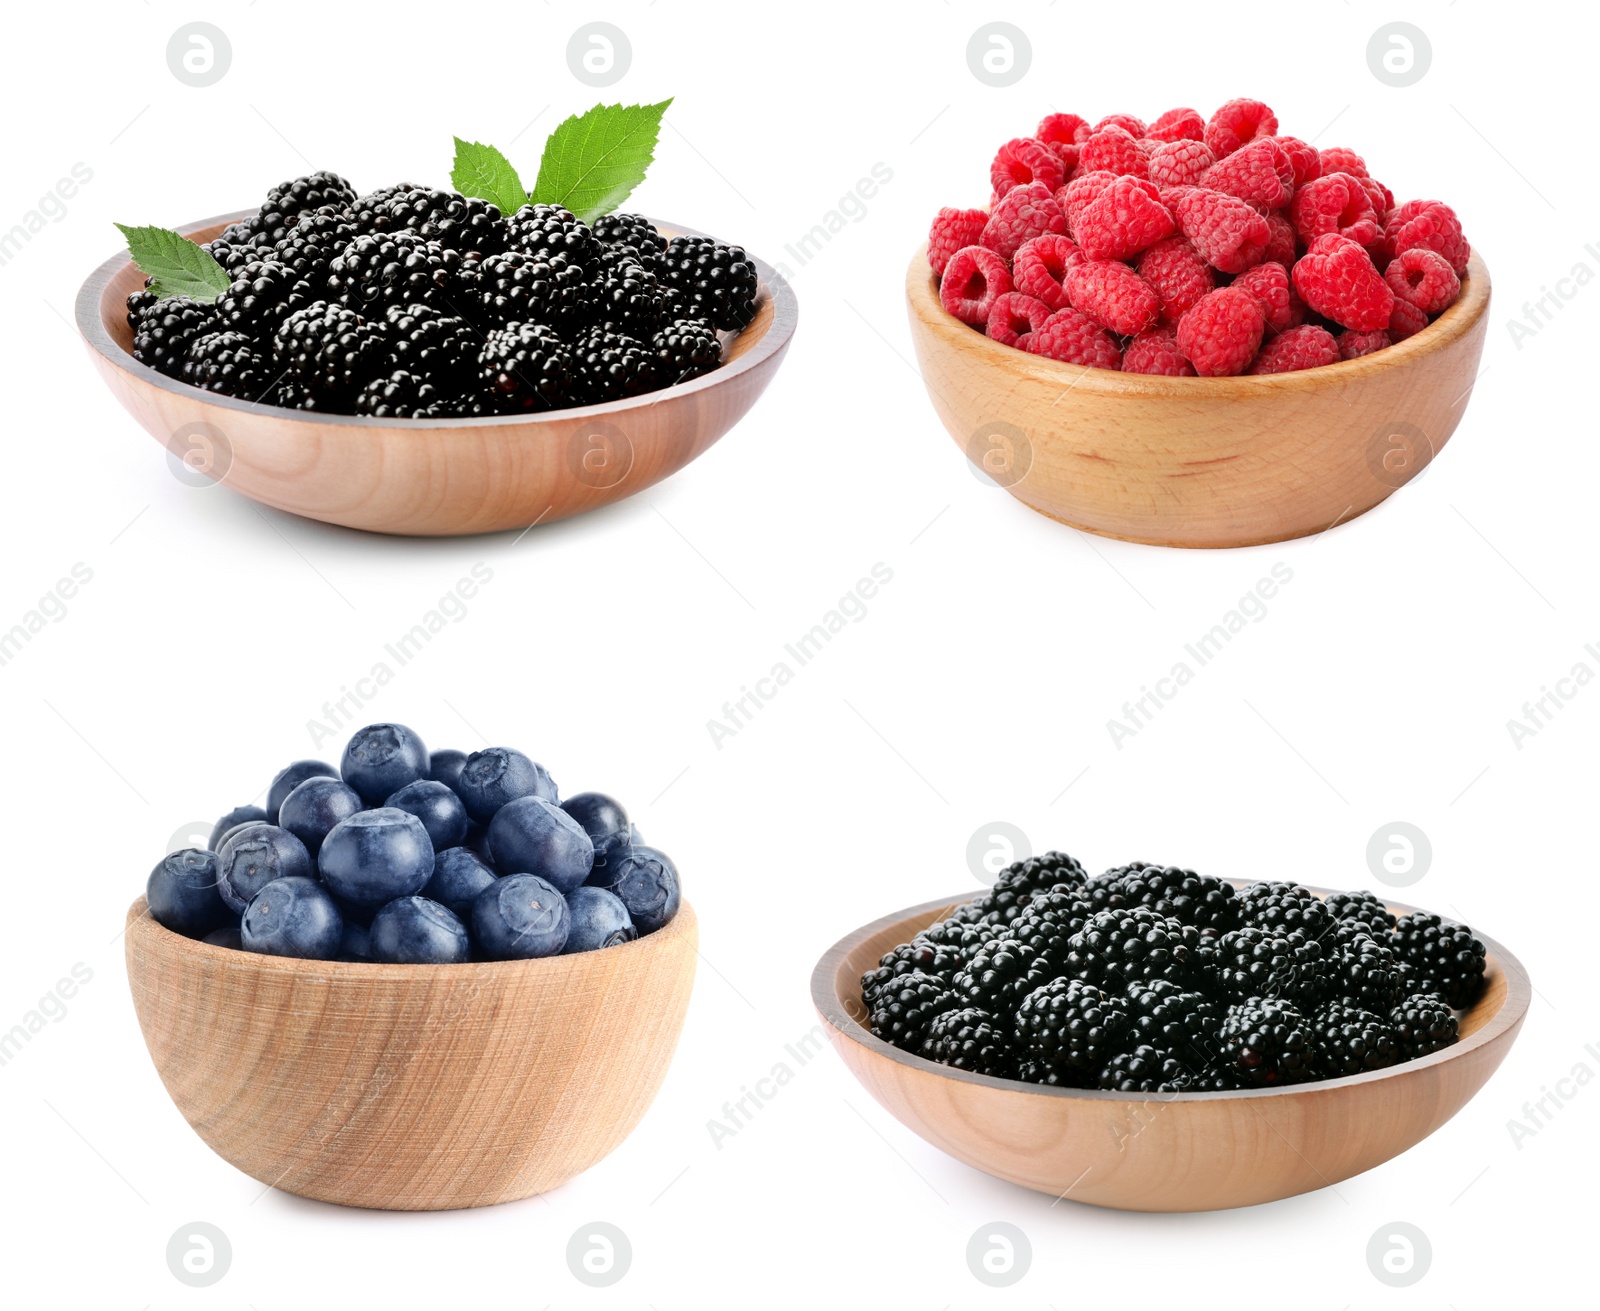 Image of Set of bowls with different fresh berries on white background